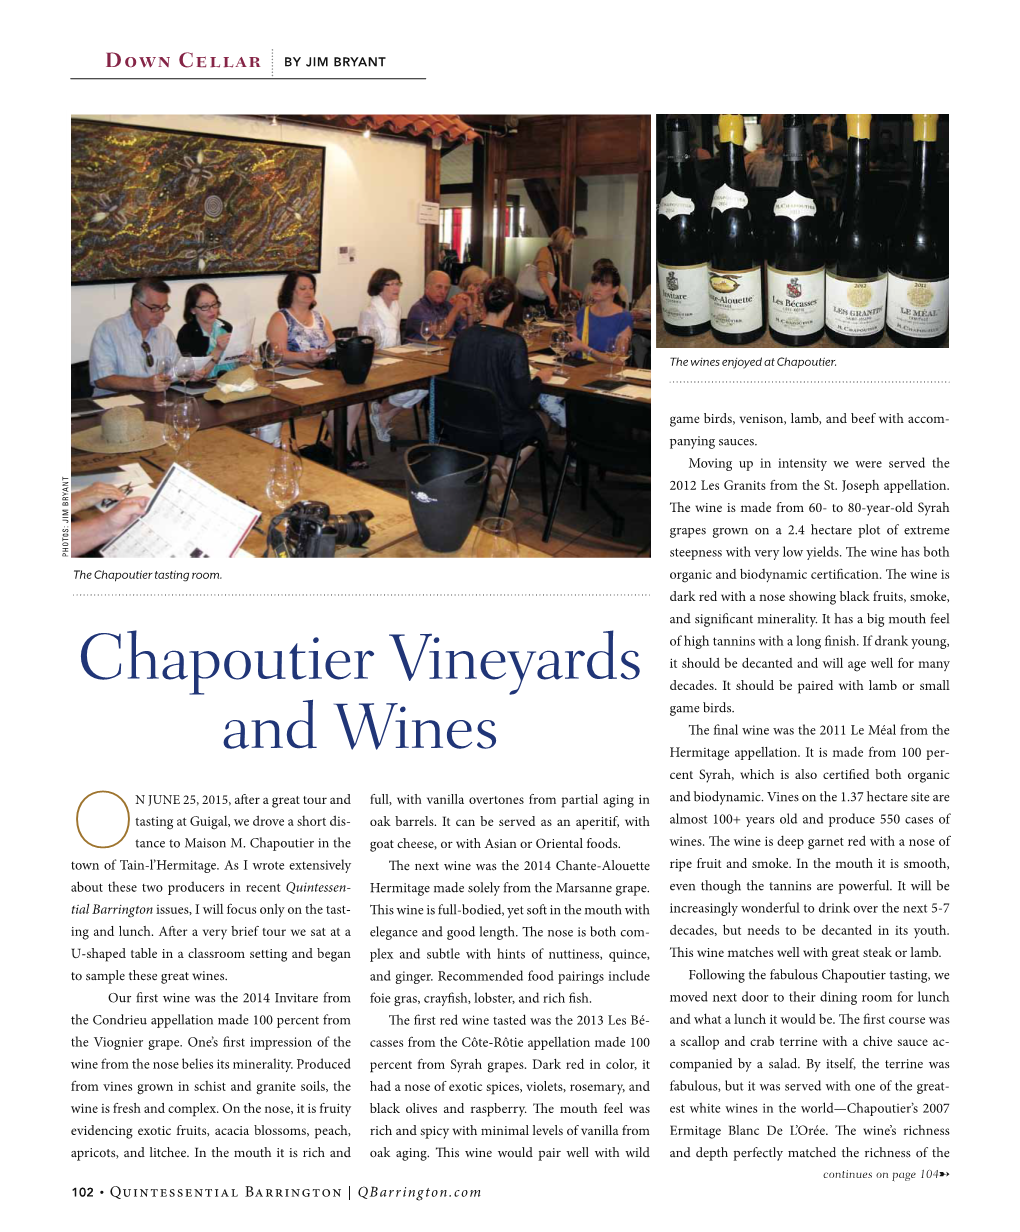 Chapoutier Vineyards and Wines